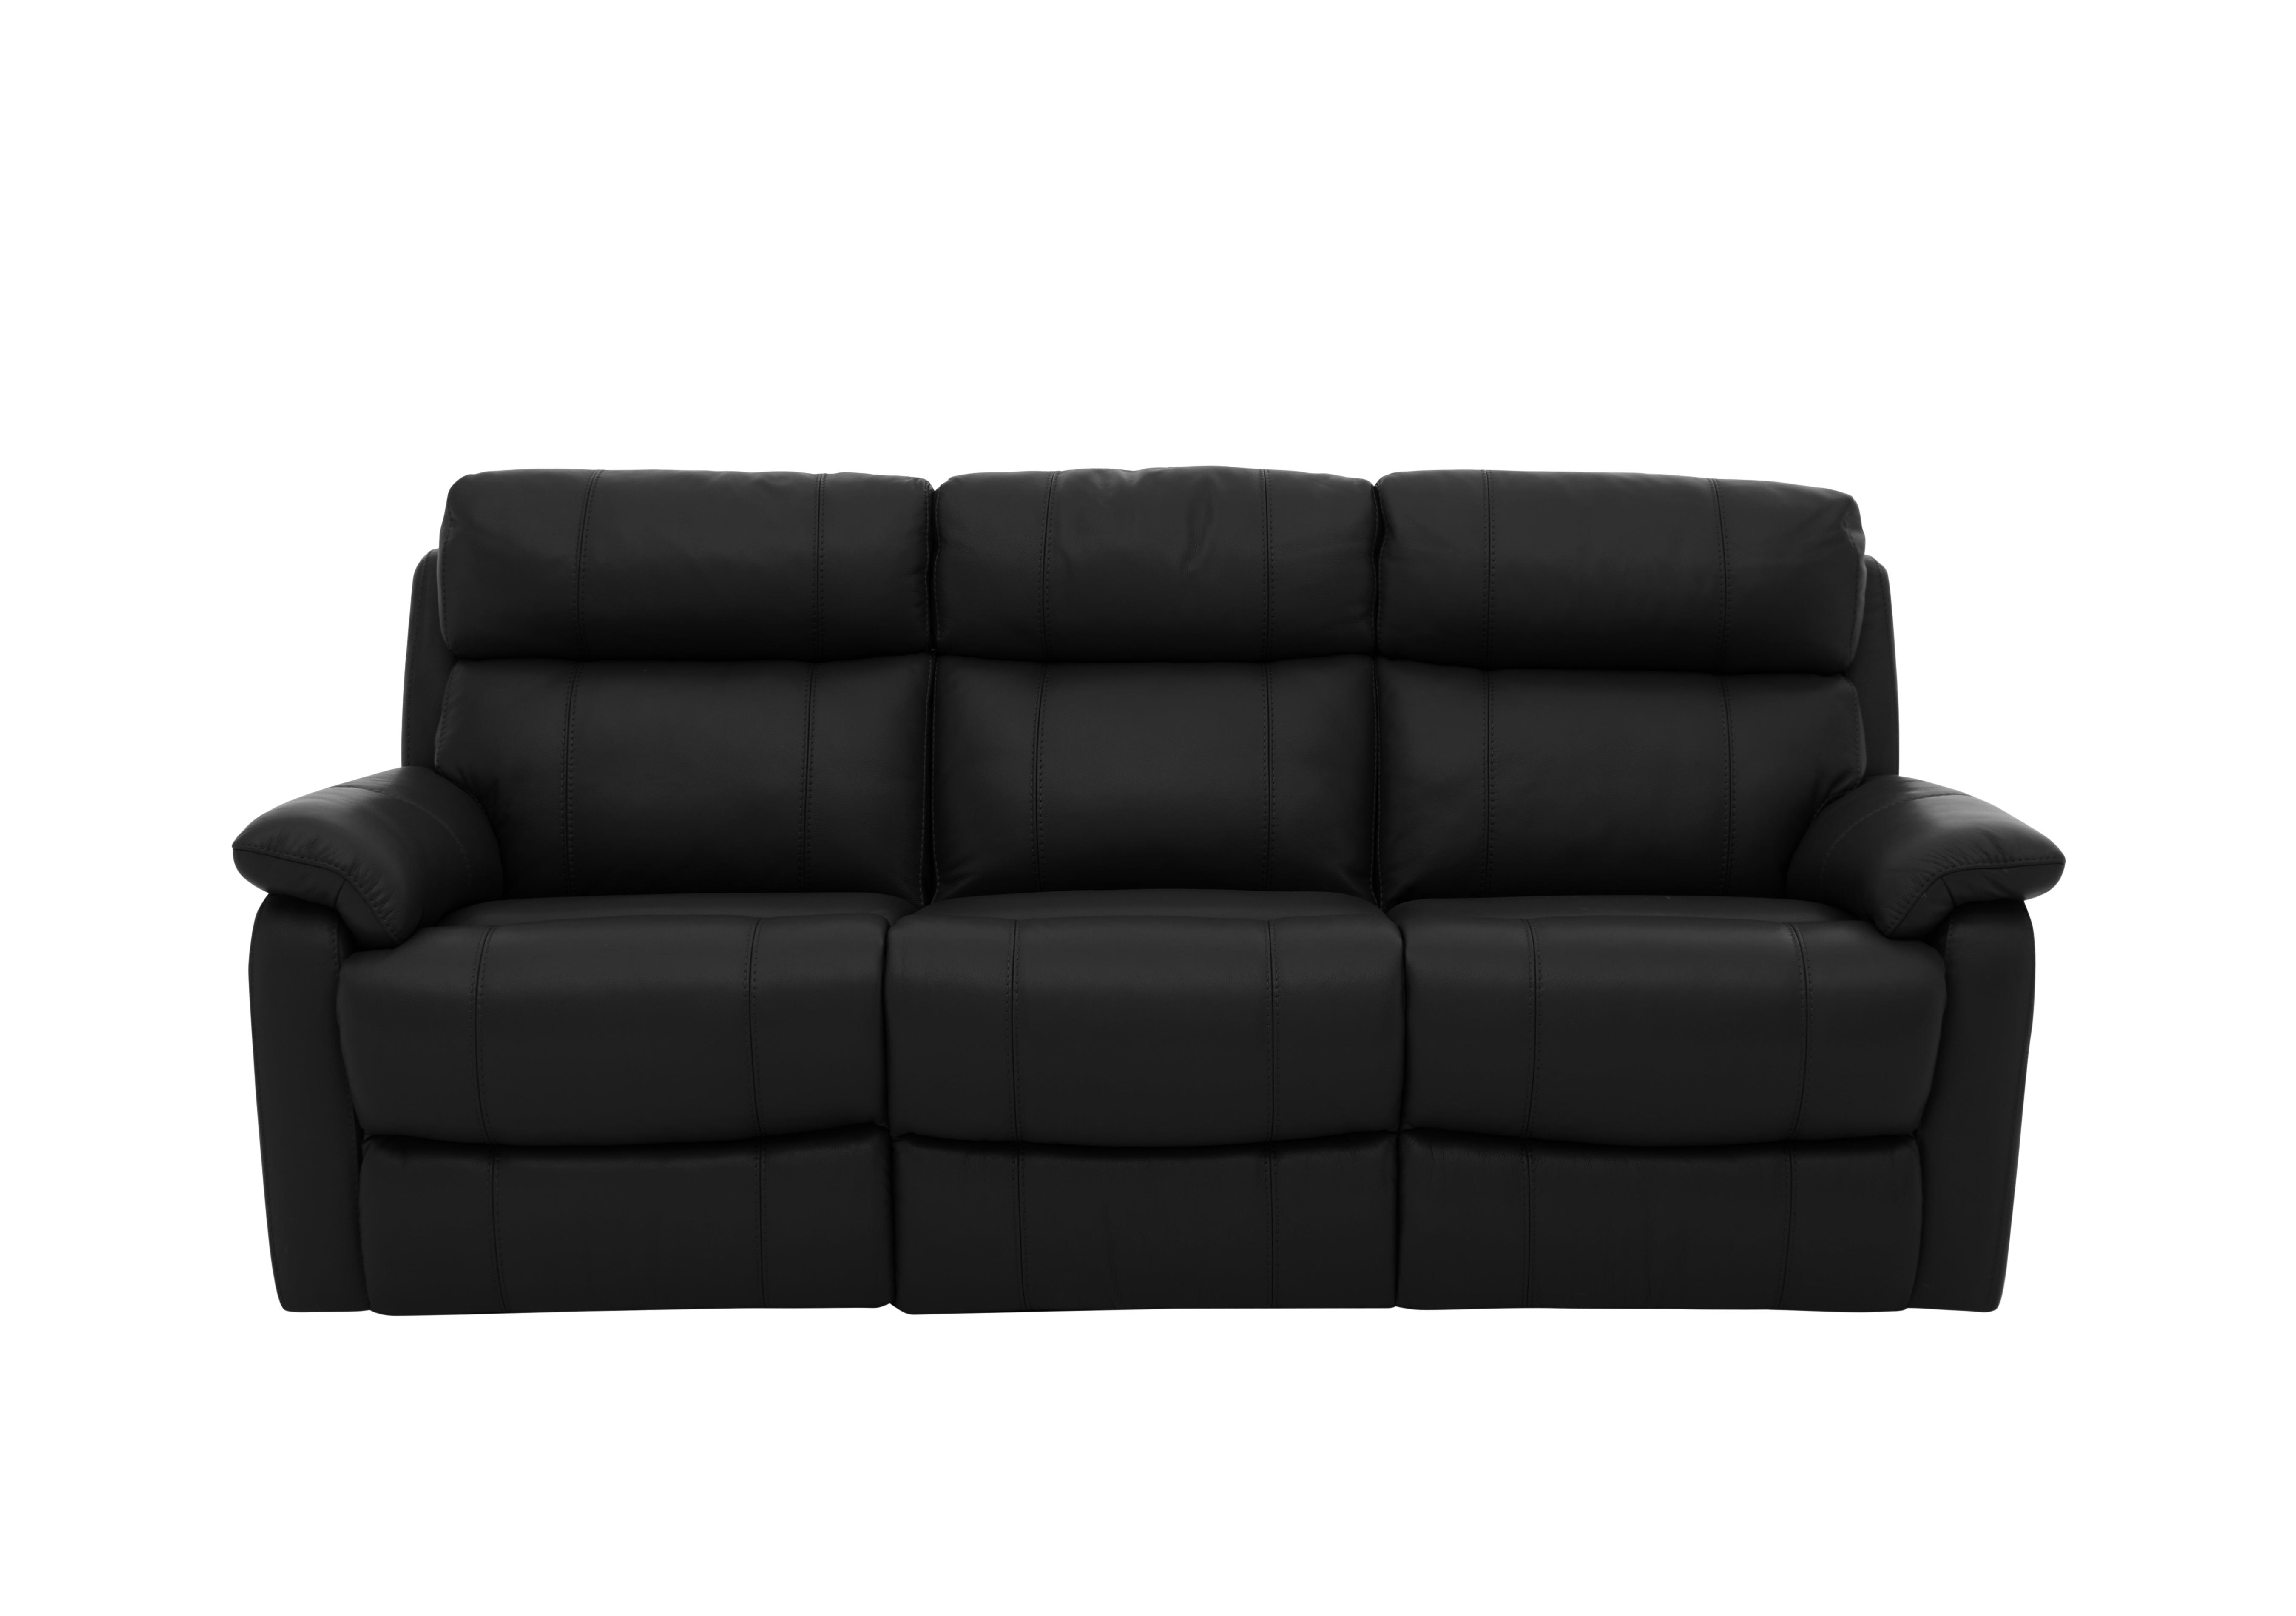 Relax Station Komodo 3 Seater Power Leather Sofa in Bv-3500 Classic Black on Furniture Village